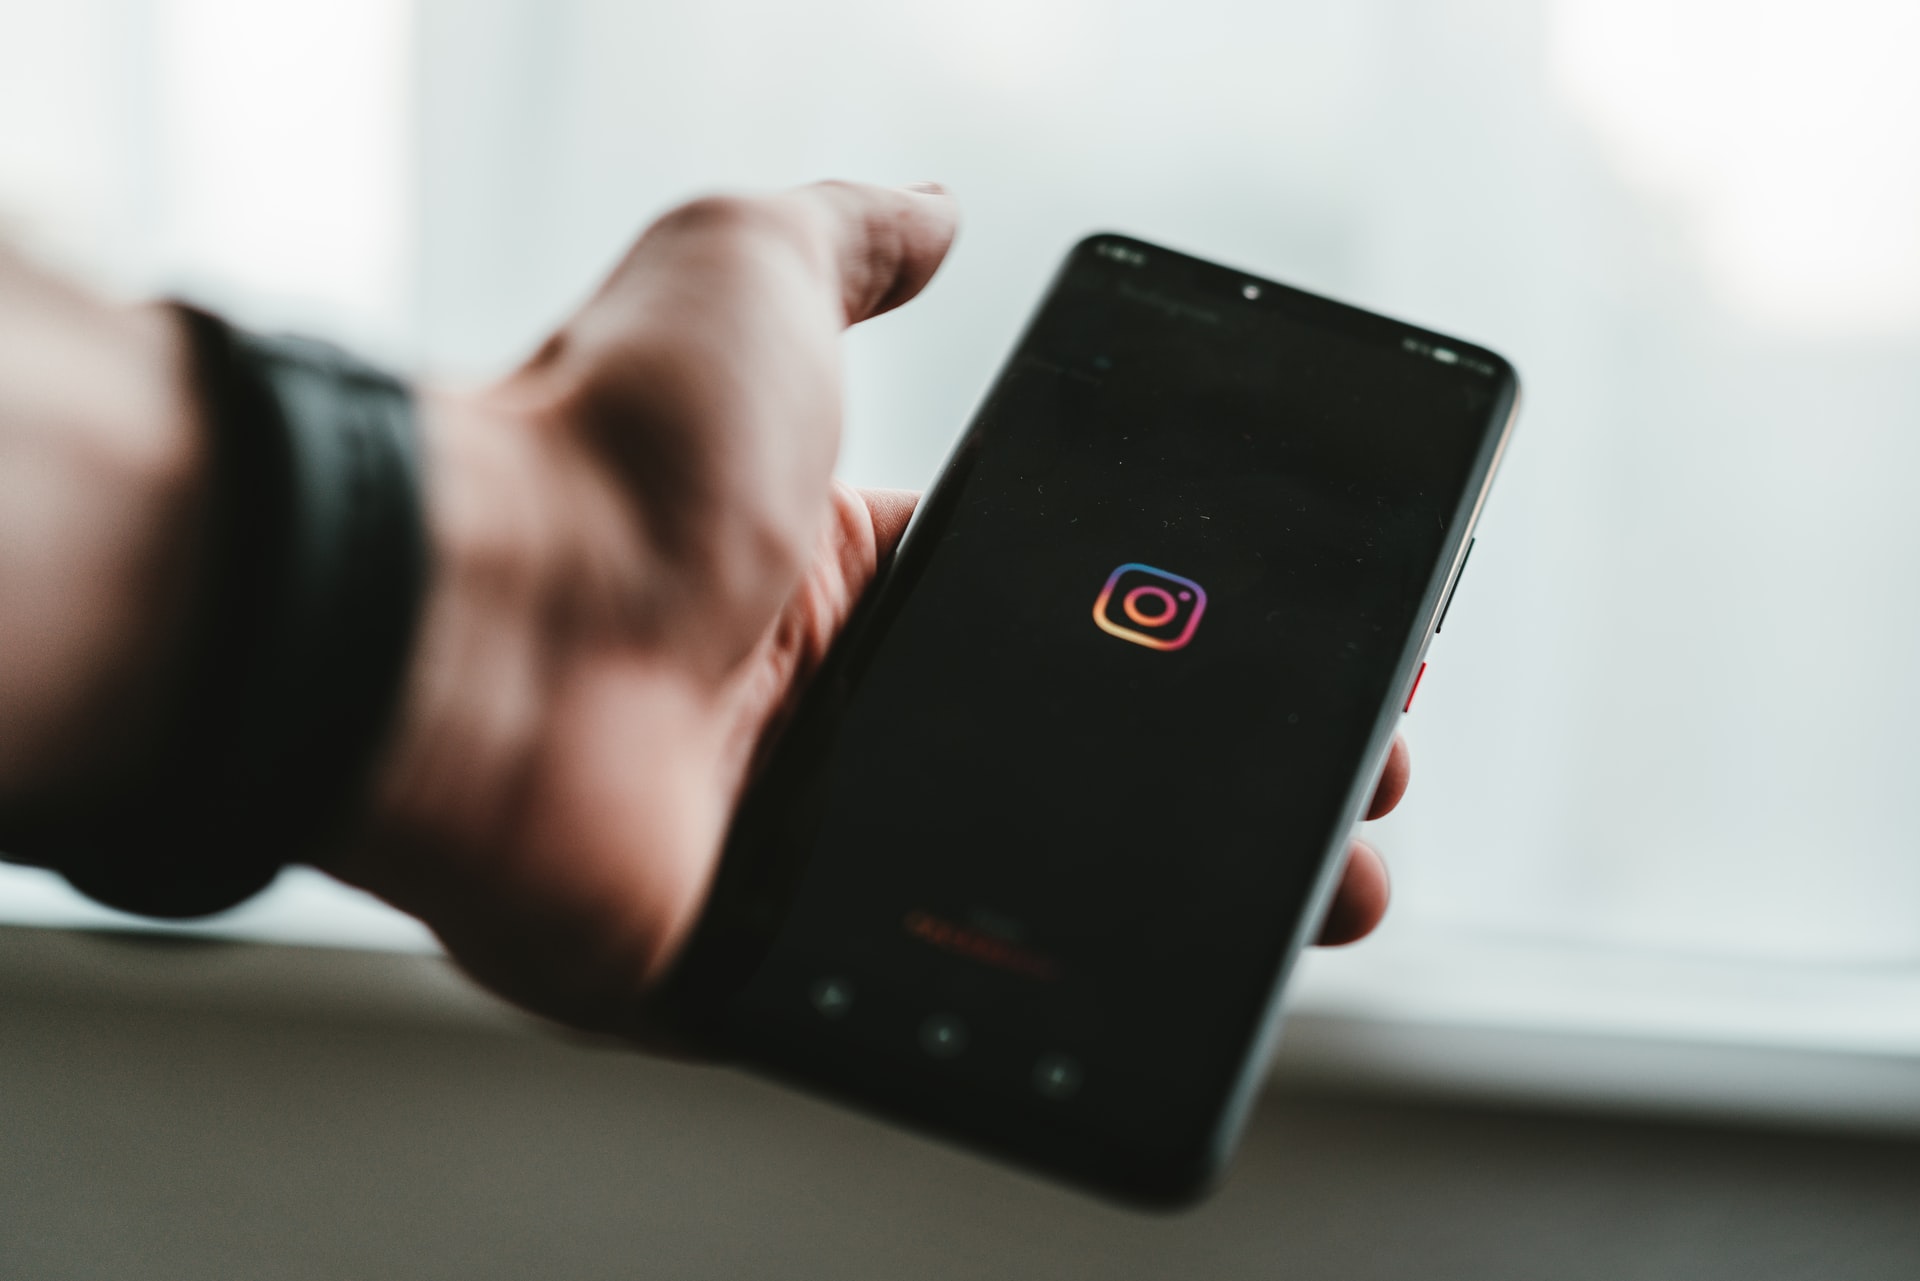 Tips to Grow Your Instagram Account